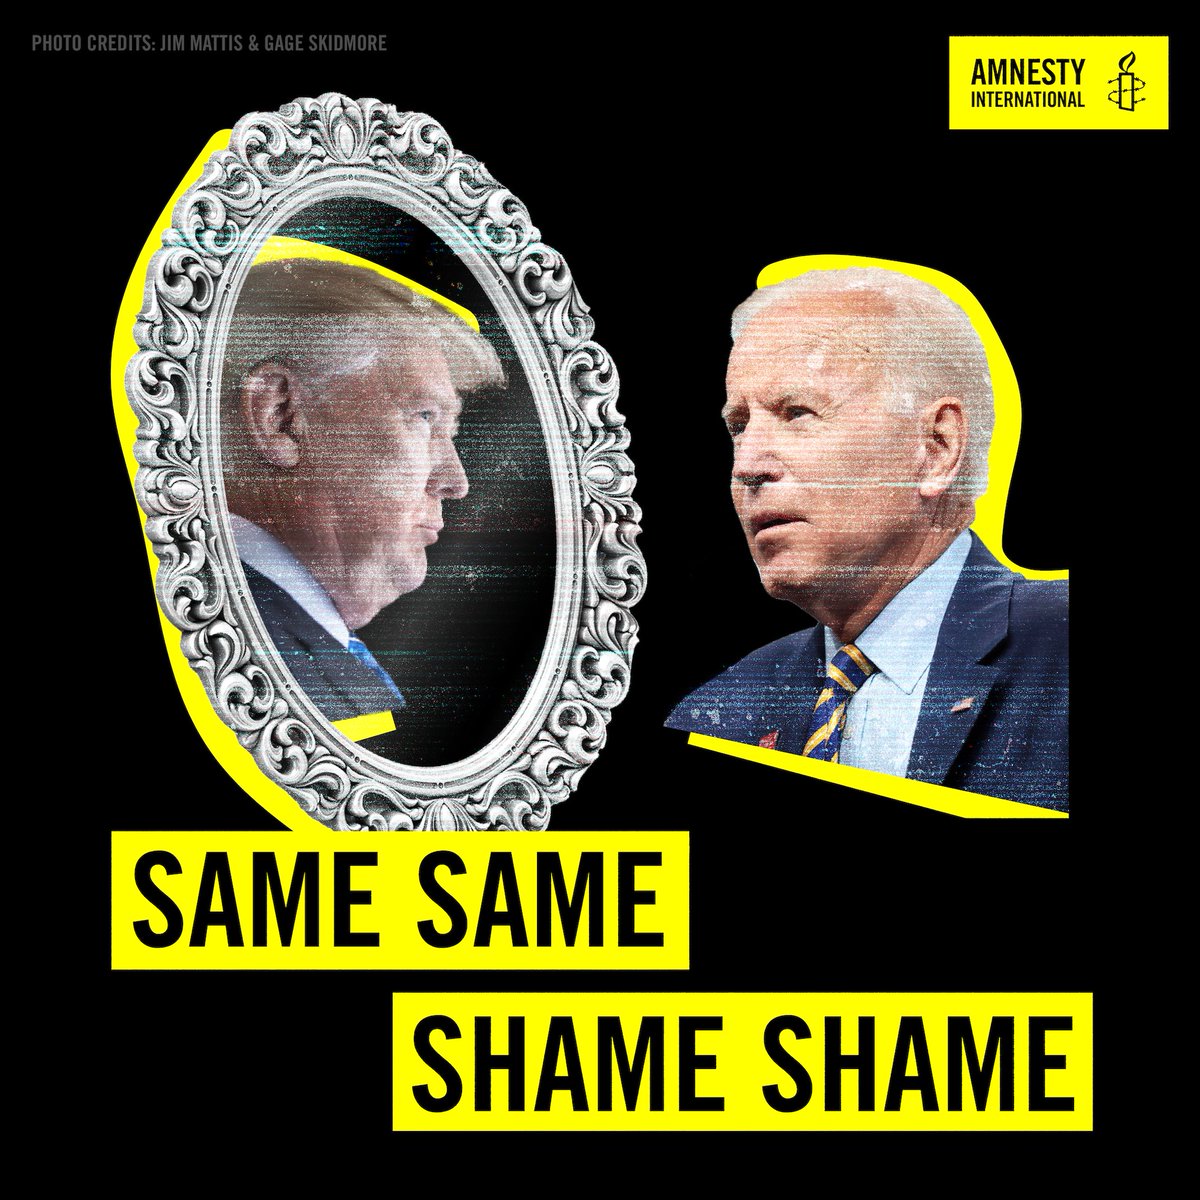 President Biden’s border policies mirror those of the Trump administration. Playing politics with the lives of human beings is always wrong. Amnesty International calls on the Biden administration to stop infringing on human rights and enact policies of welcome.